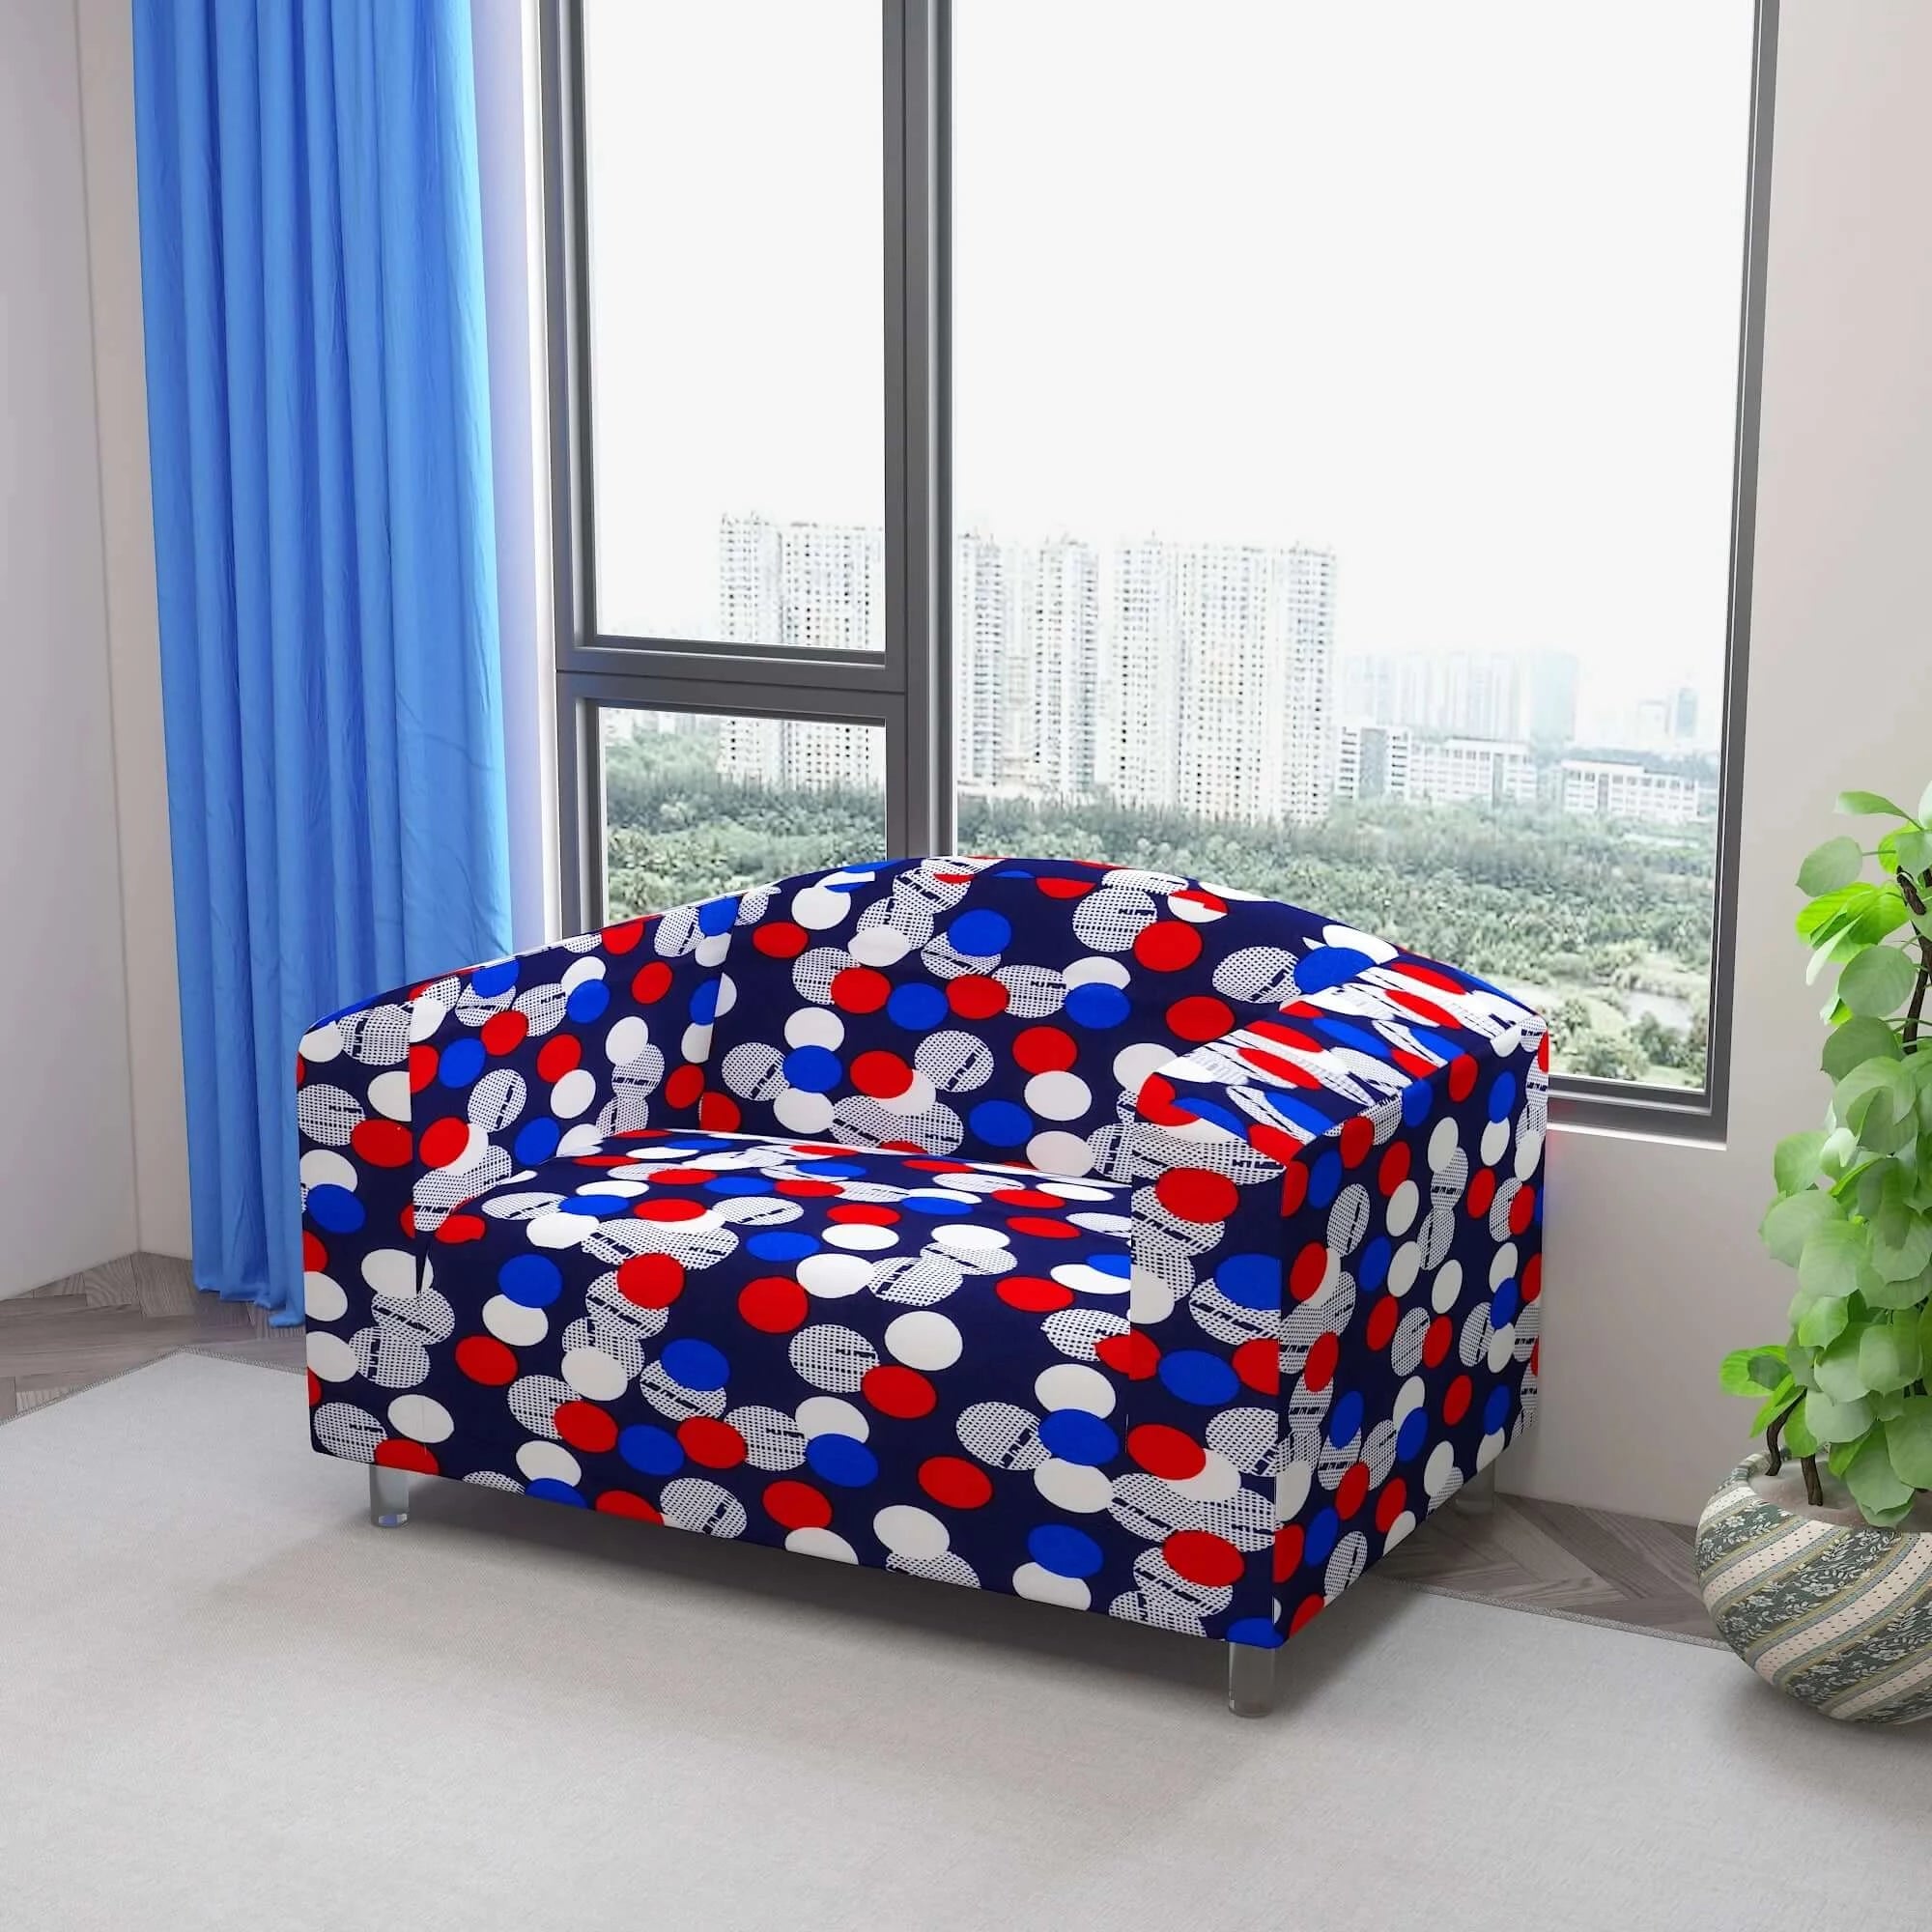 Marigold Printed Sofa Protector Cover Full Stretchable, MG20 - Dream Care Furnishings Private Limited